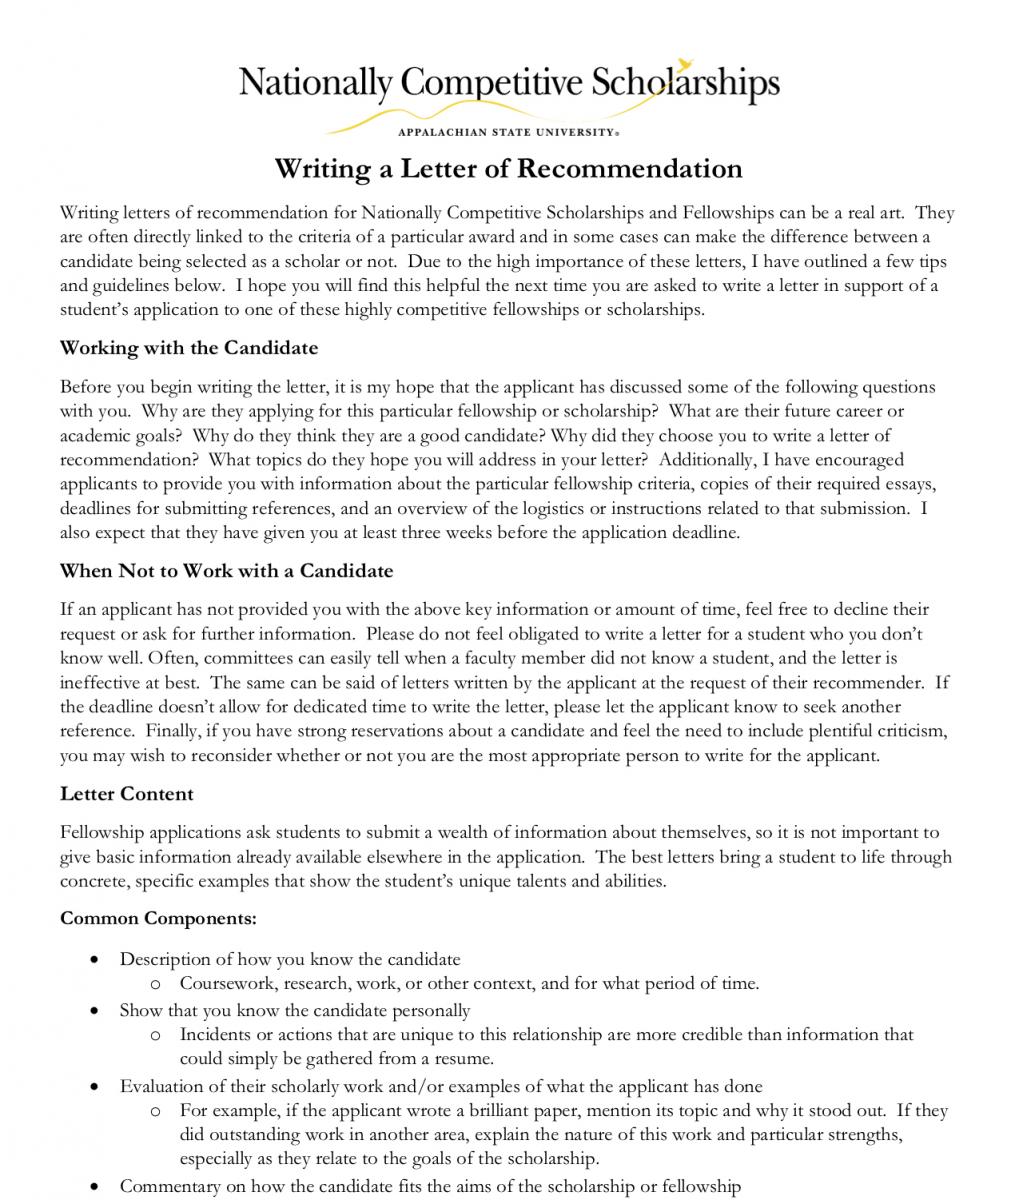 Resources for Writing Letters of Recommendation  Nationally